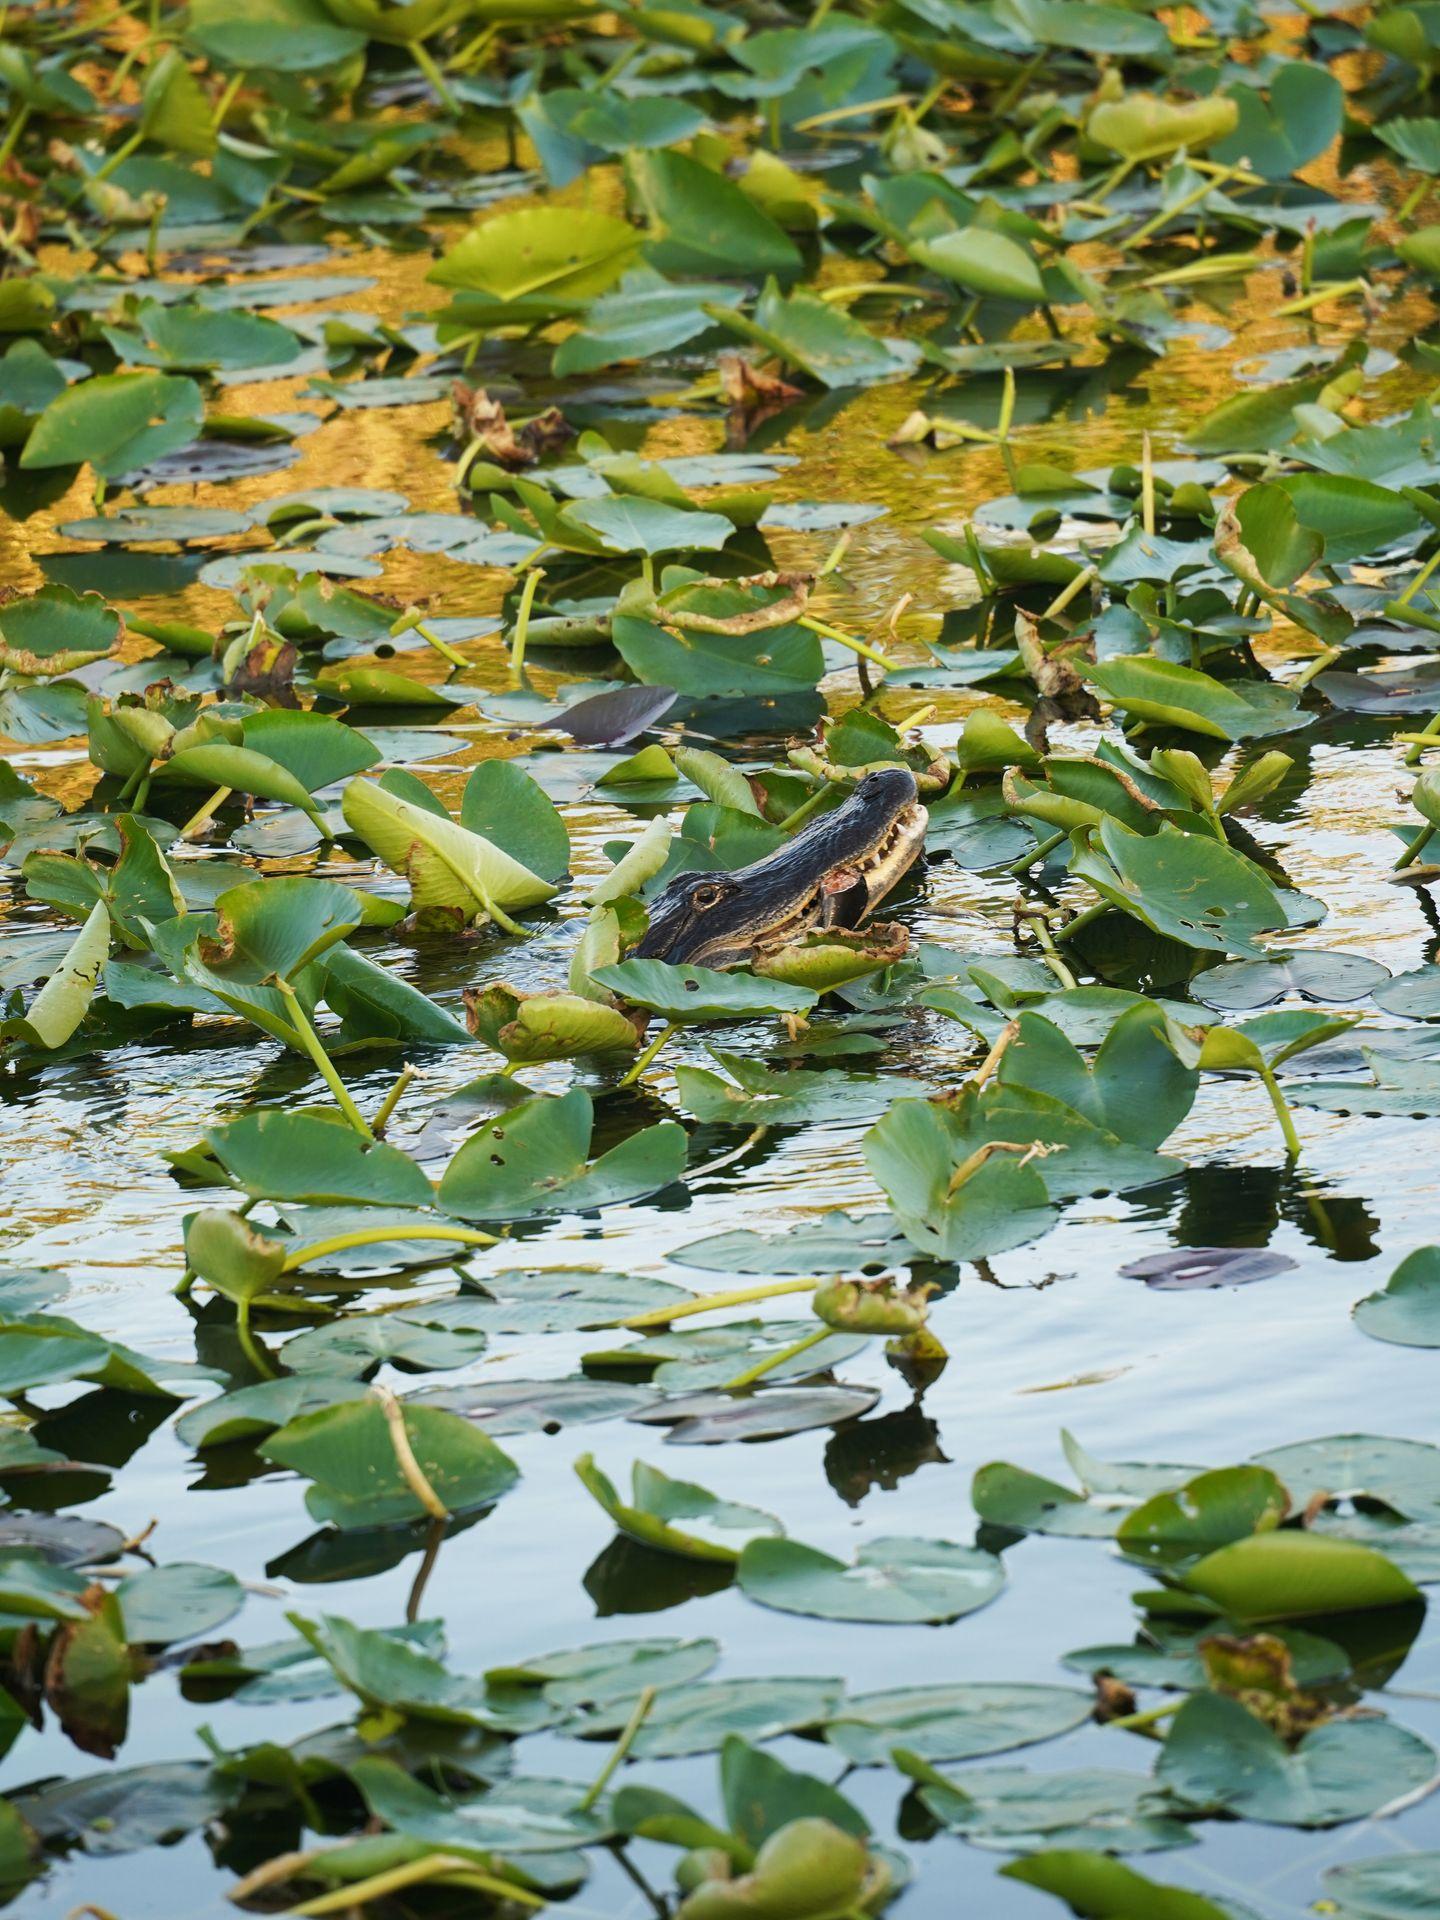 A alligator sticks its' head out of a pond dense with lilypads. There is a bird of fish inside of the alligators mouth.